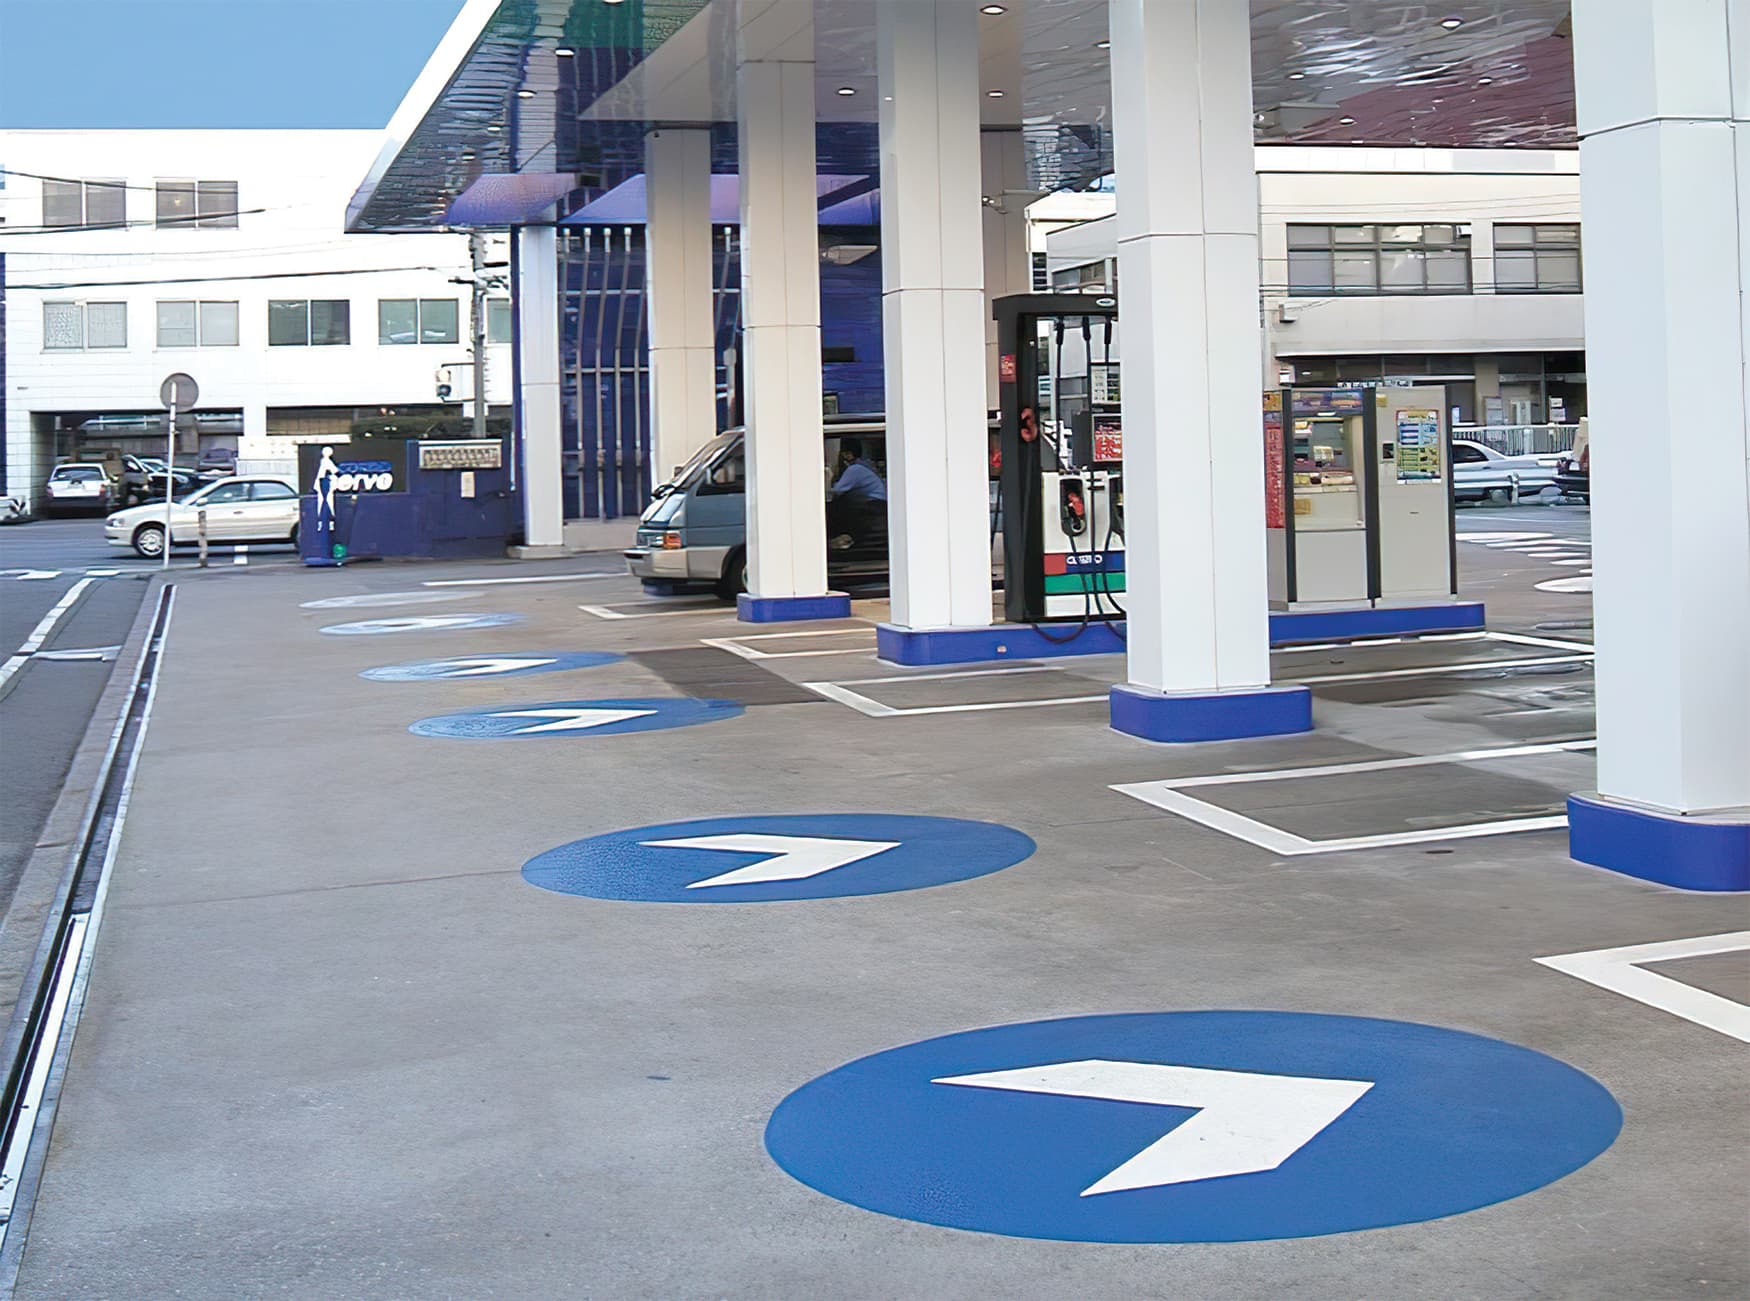 Cosmo i-Serve, a self-serve gas station in Tokyo, Japan. RSM Design prepared environmental graphics and branding services.